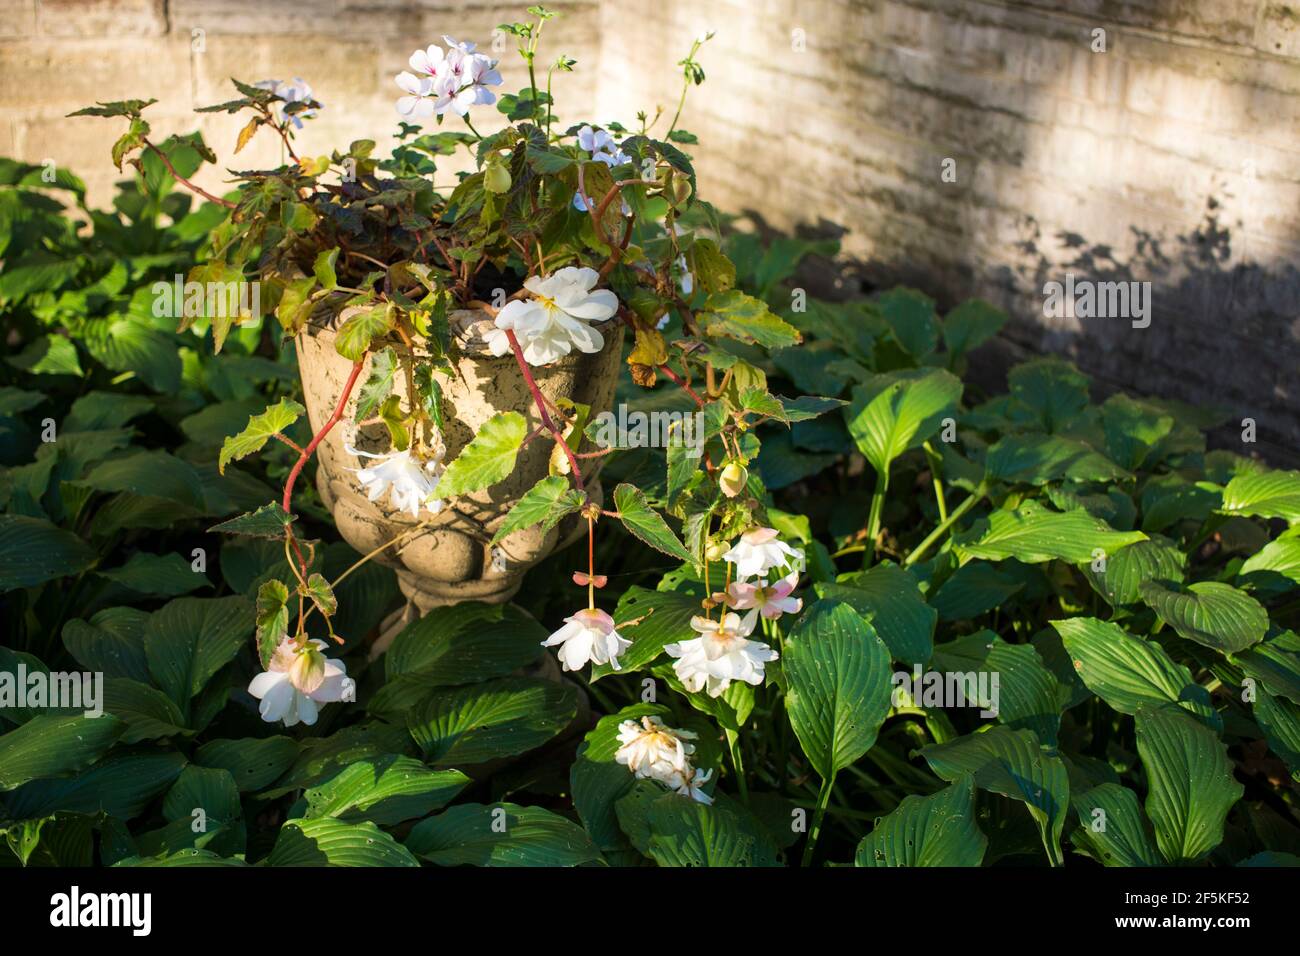 white colored double flowered Begonia at full bloom in an urban garden Stock Photo